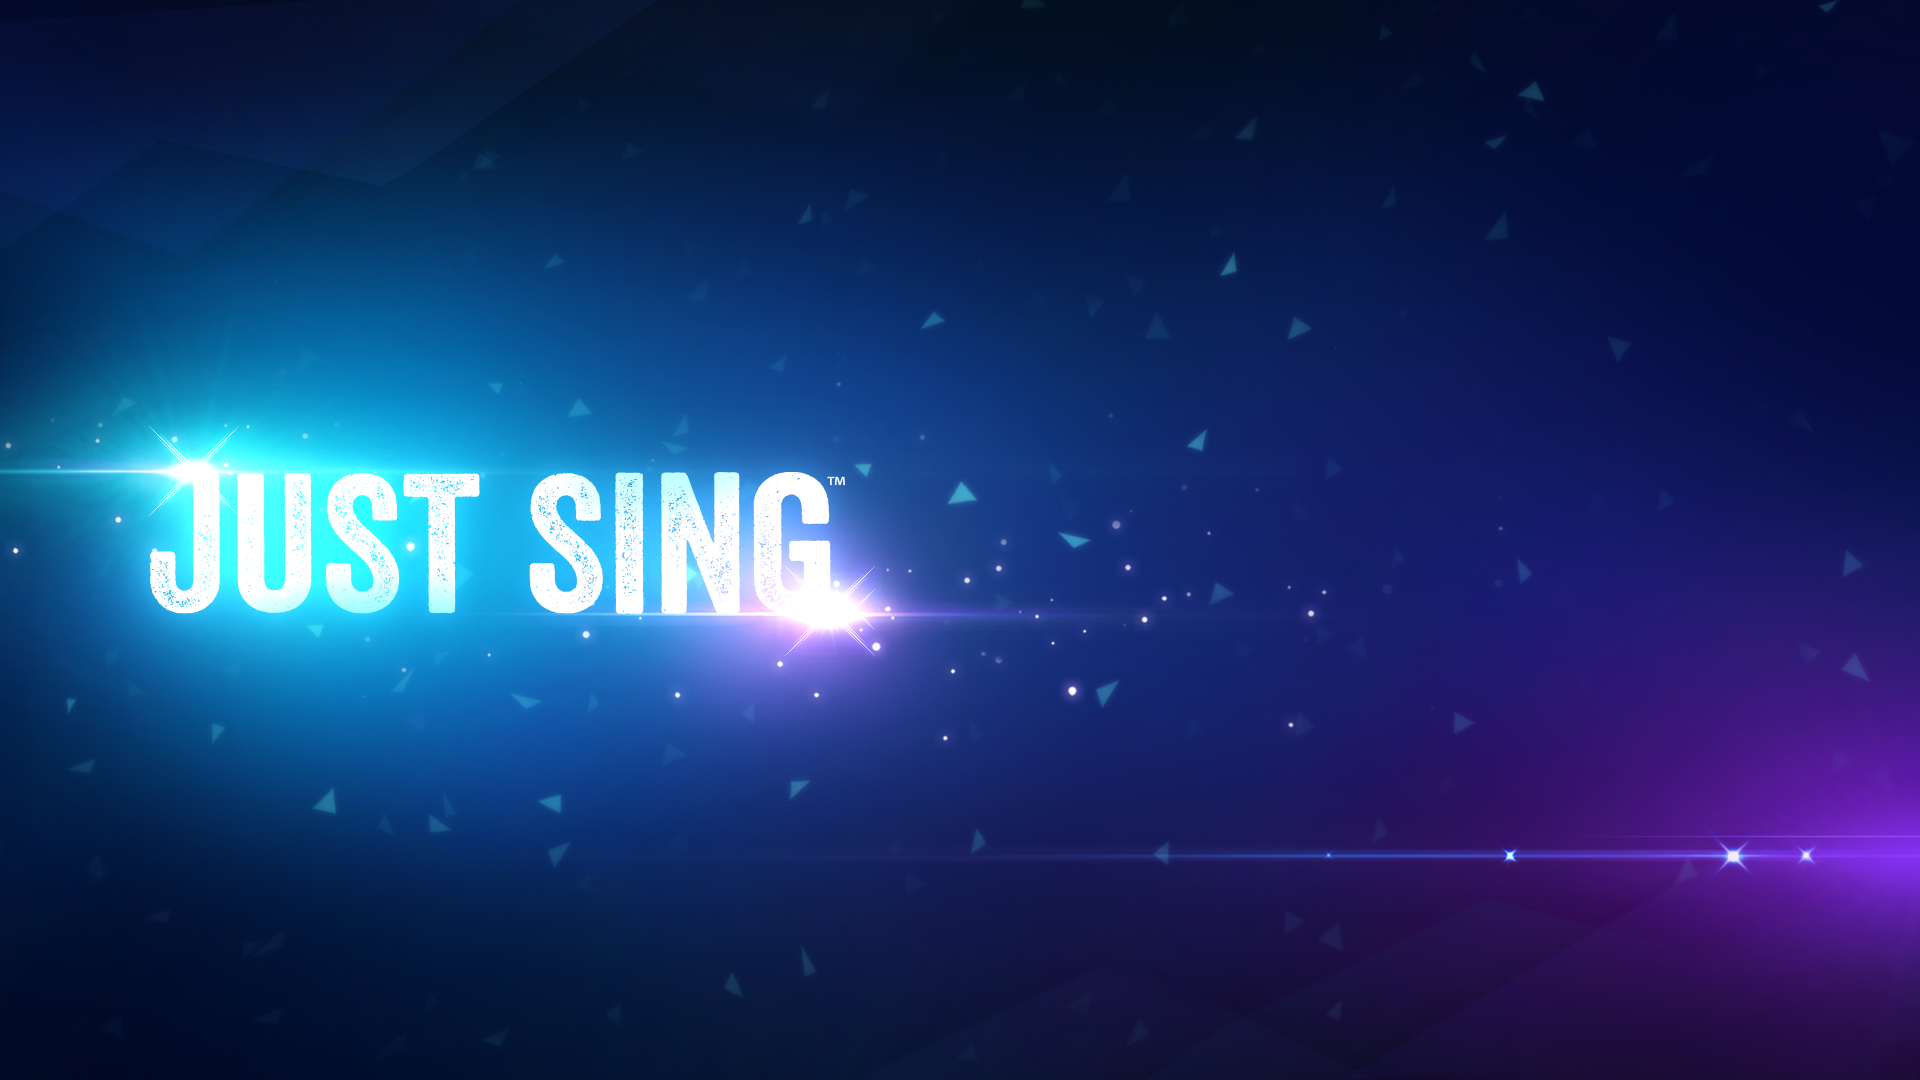 Welcome to Just Sing